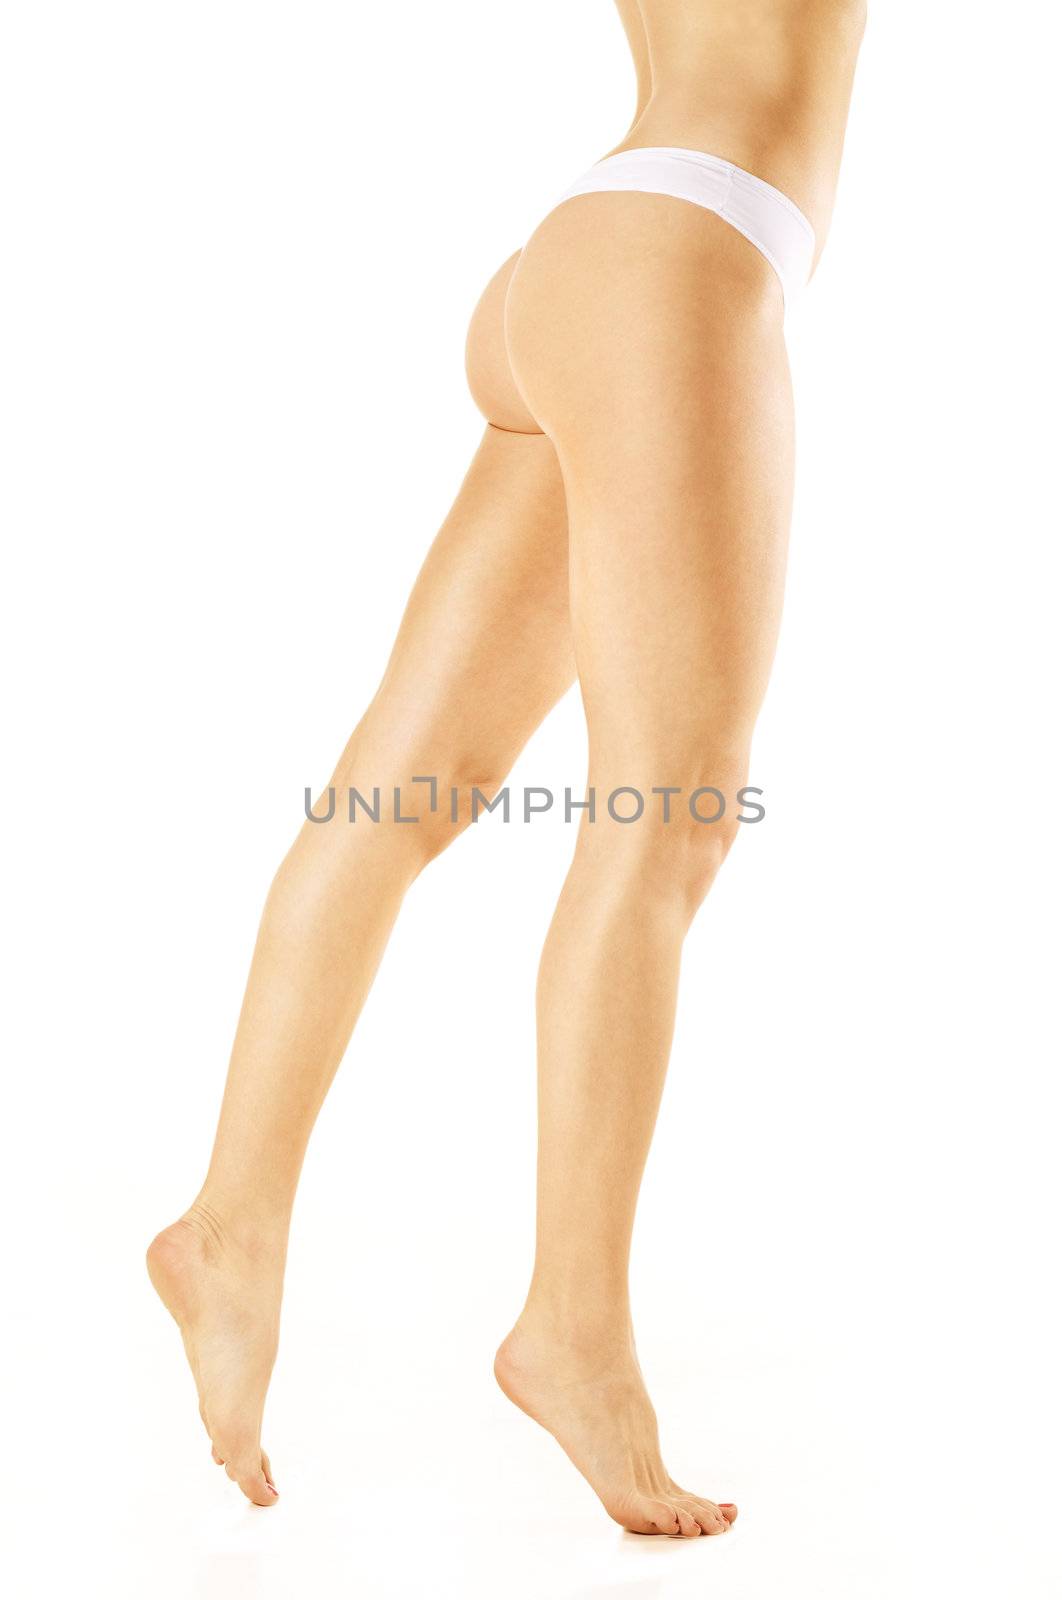 Slim woman legs over isolated white background